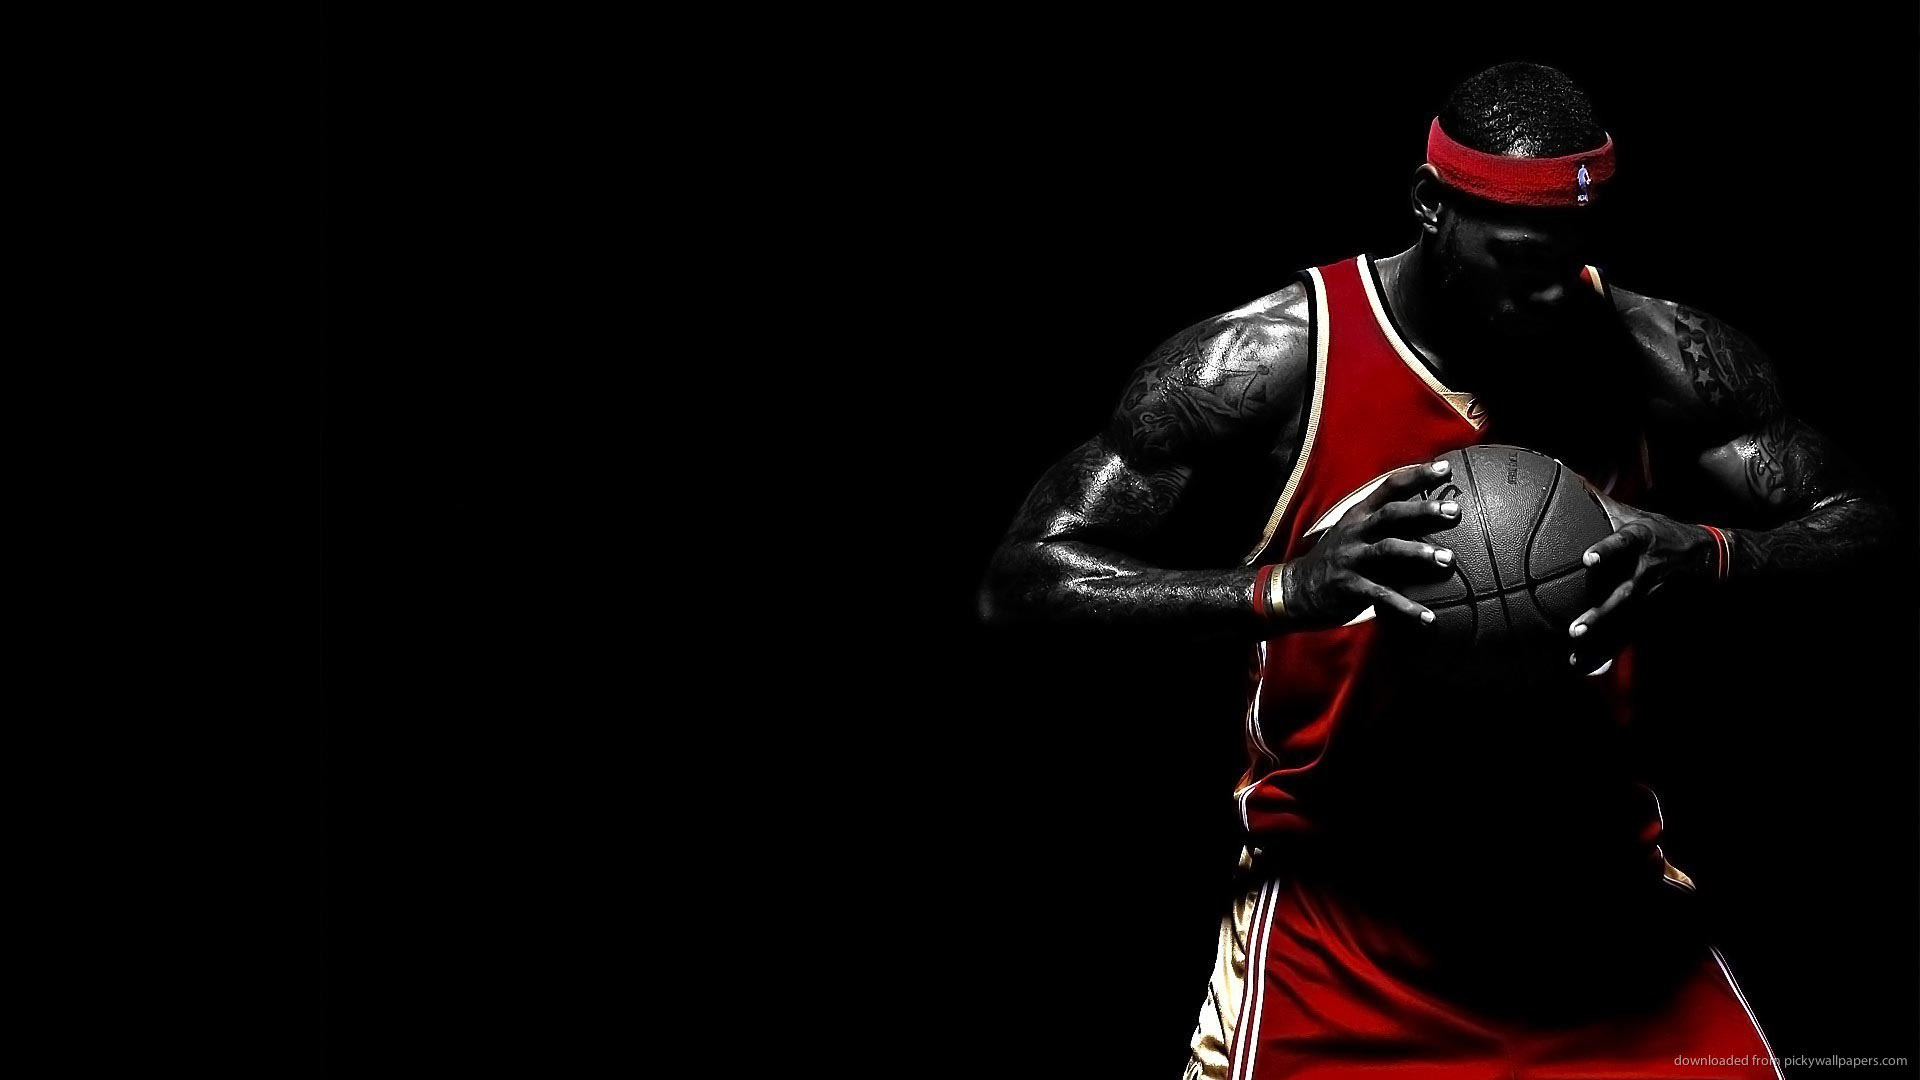 48+ LeBron James wallpapers HD free Download